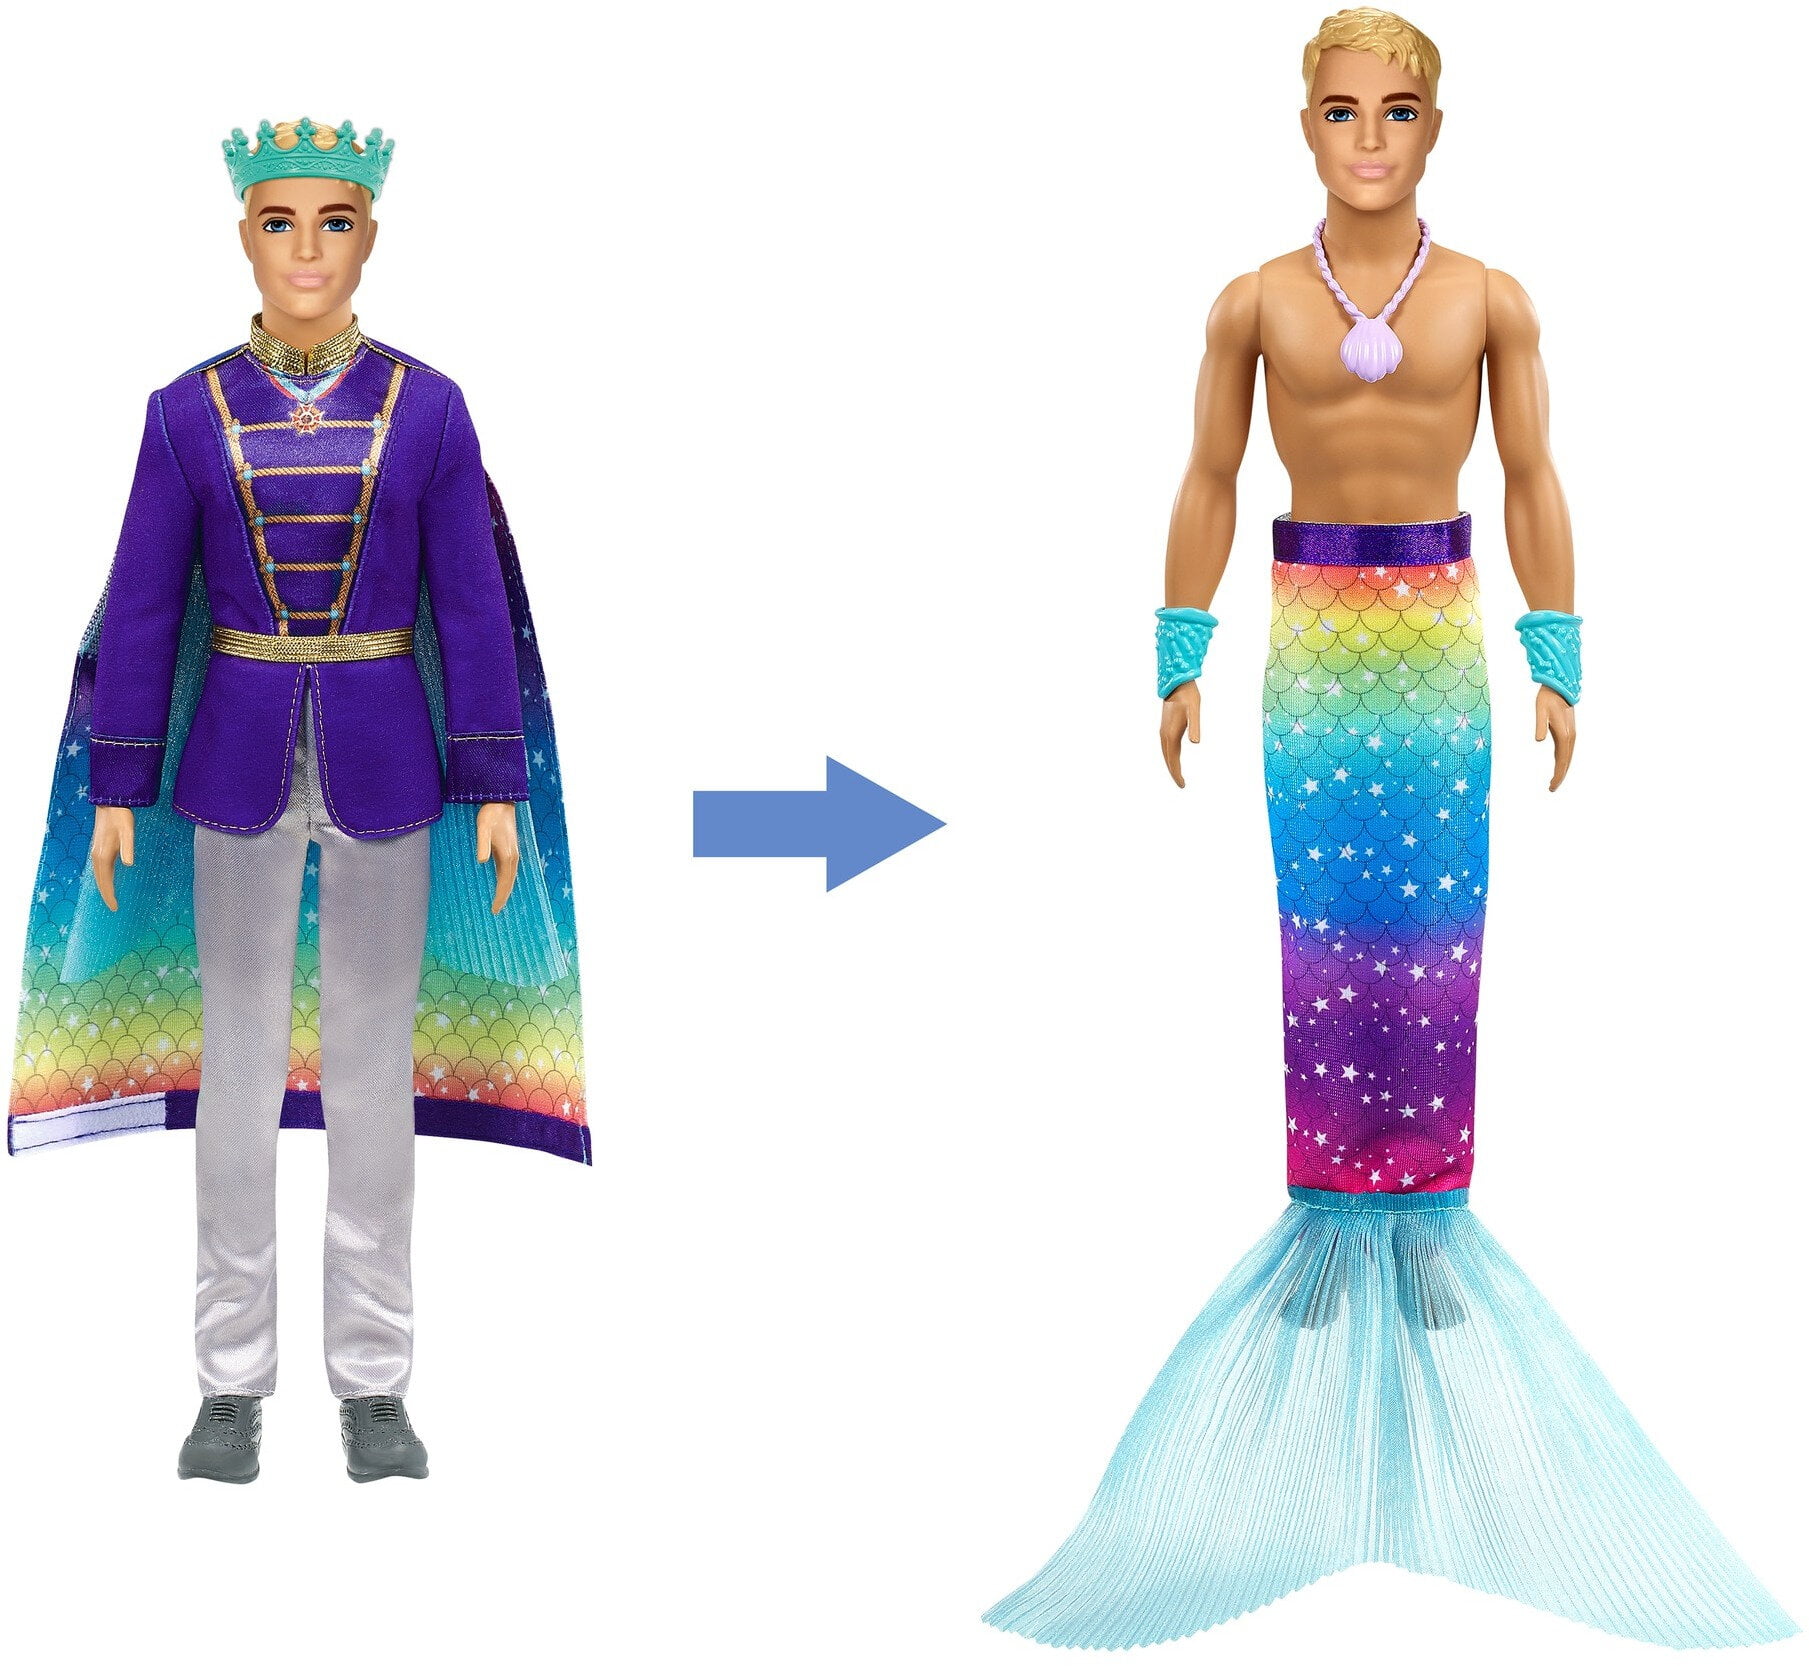 Production Breathing To meditation Barbie Dreamtopia 2-in-1 Prince, ages 3 & up - Walmart.com